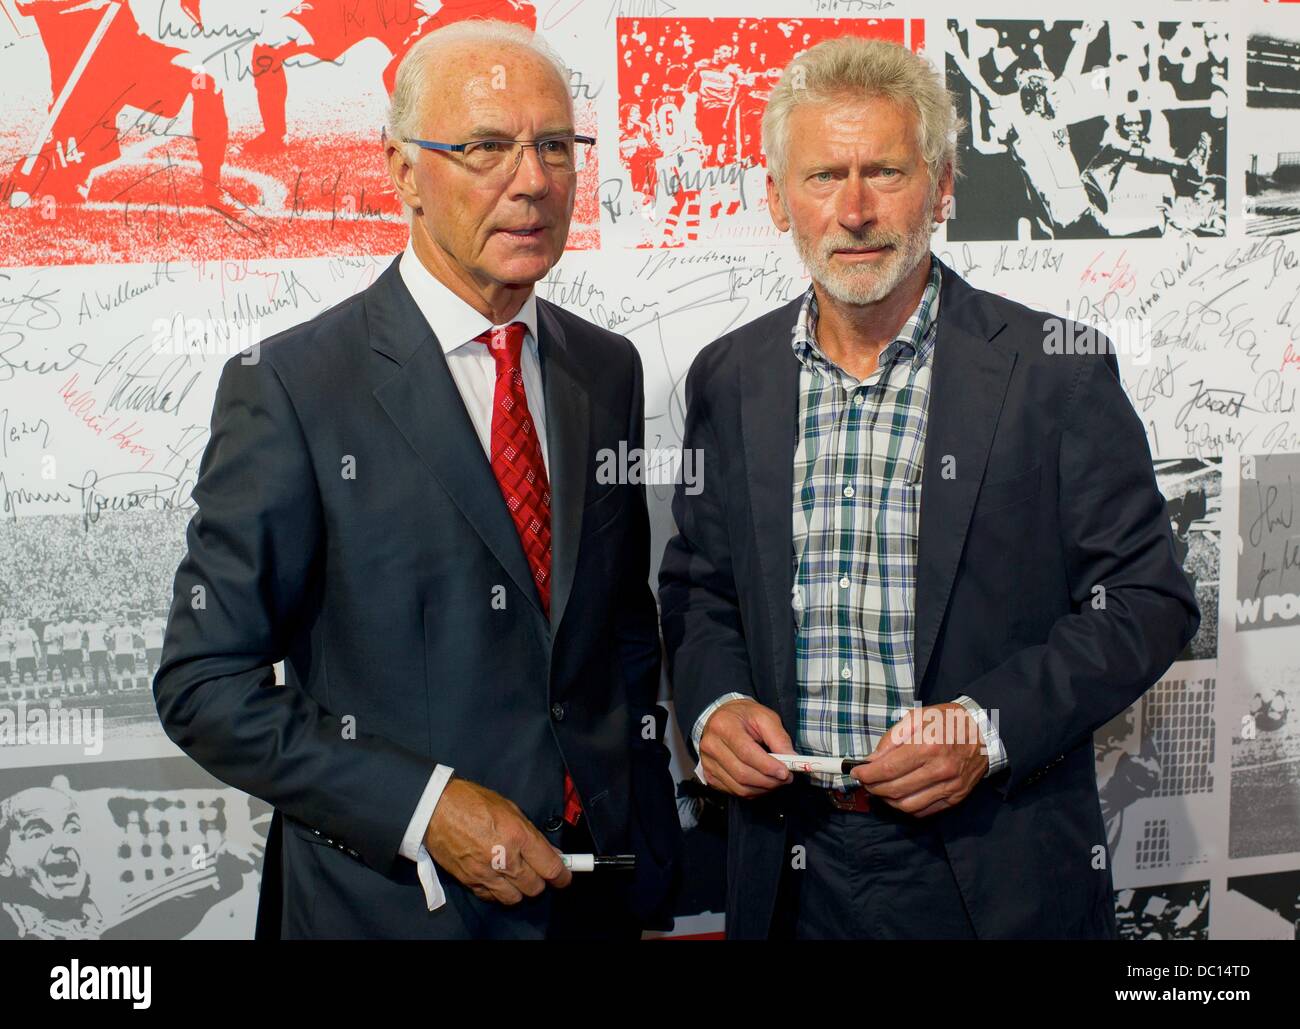 Berlin, Germany. 06th Aug, 2013. Franz Beckenbauer (L) and Paul Breitner pose prior to an event to celebrate the 50th anniversary of the German Bundesliga in Berlin, Germany, 06 August 2013. Photo: Tim Brakemeier/dpa/Alamy Live News Stock Photo